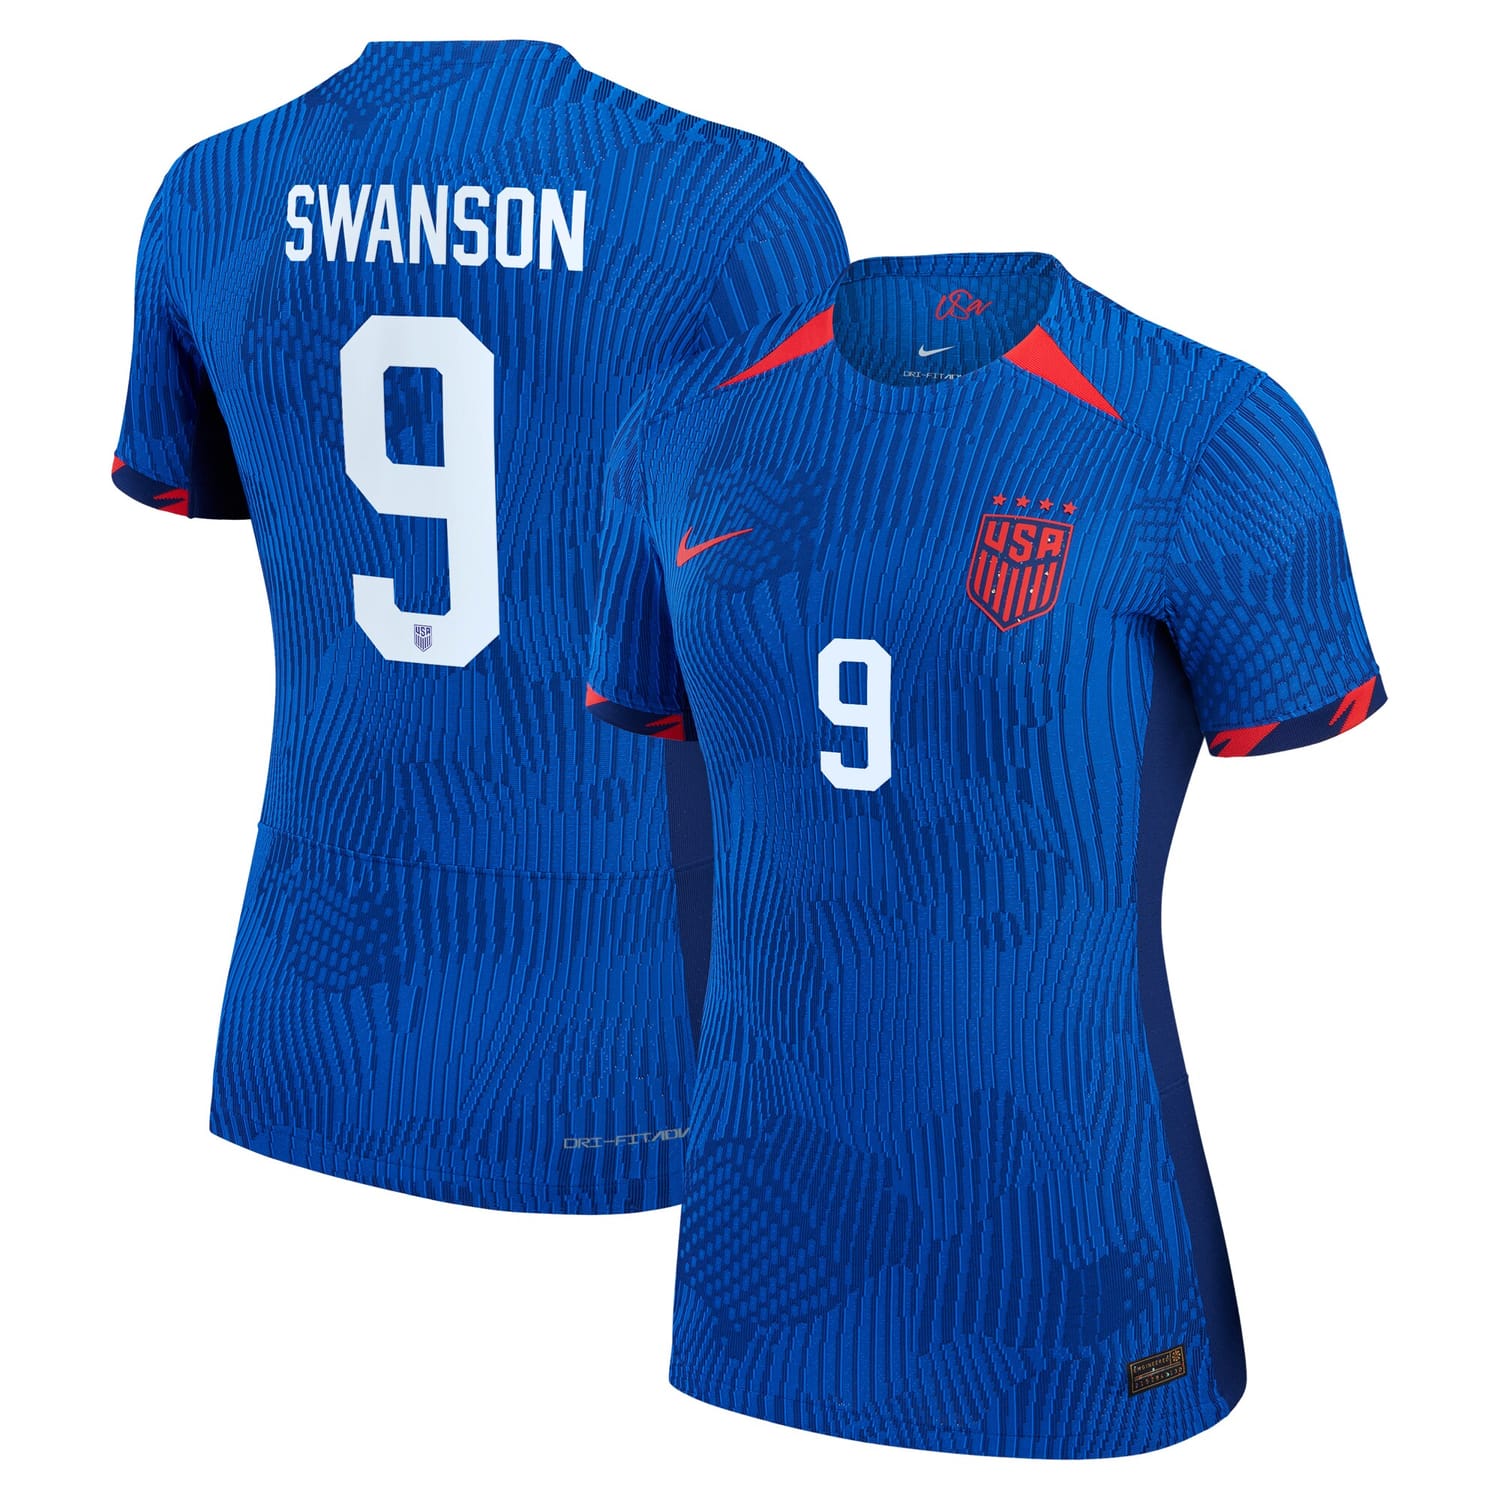 USWNT Away Authentic Jersey Shirt Royal 2023 player Mallory Swanson printing for Women